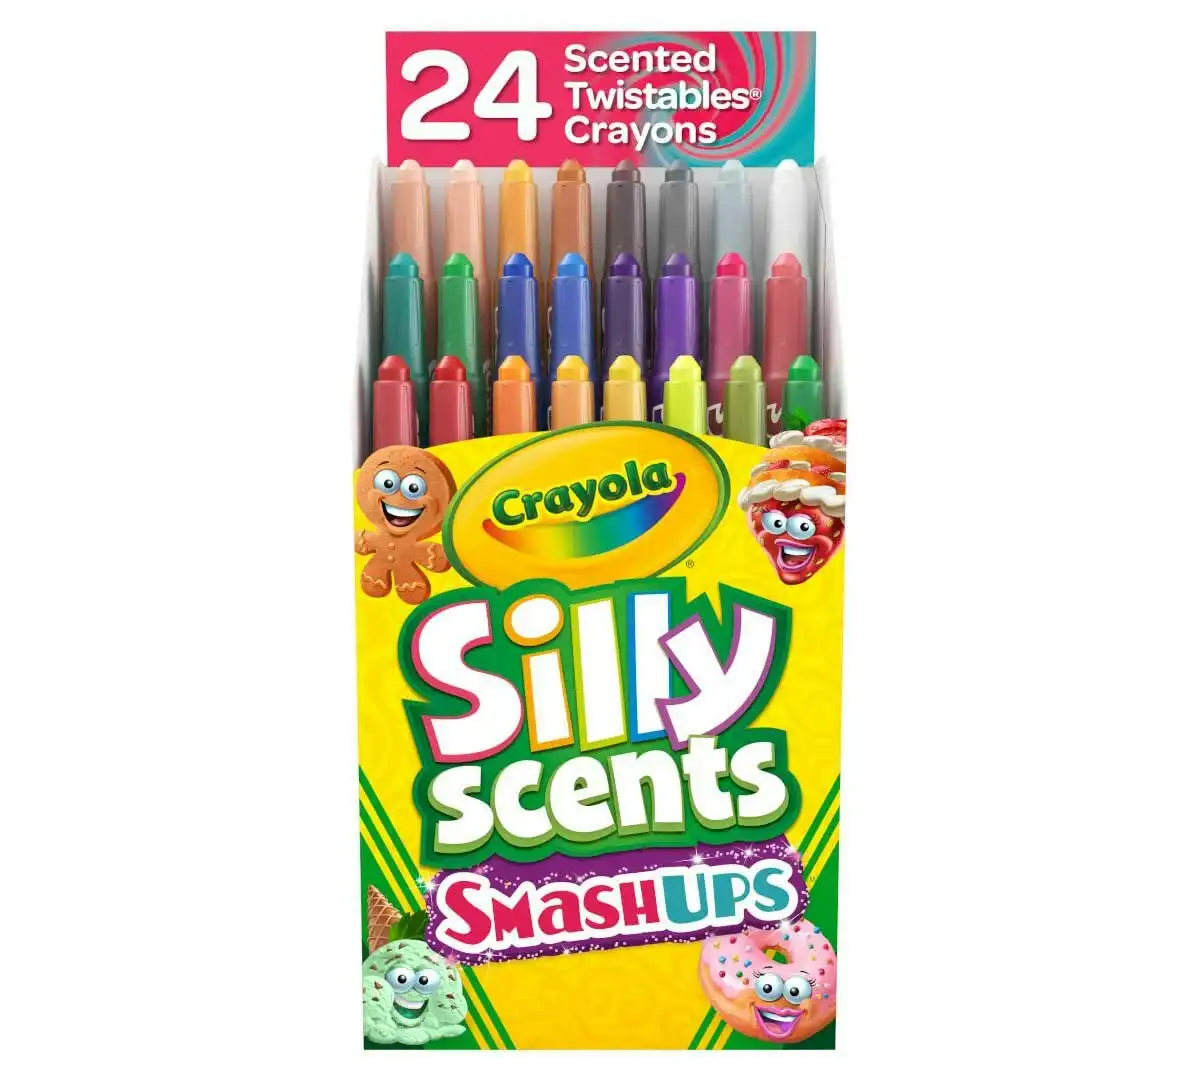 Crayola - Silly Scents Smash Ups Twistables Scented Crayons 24 Count